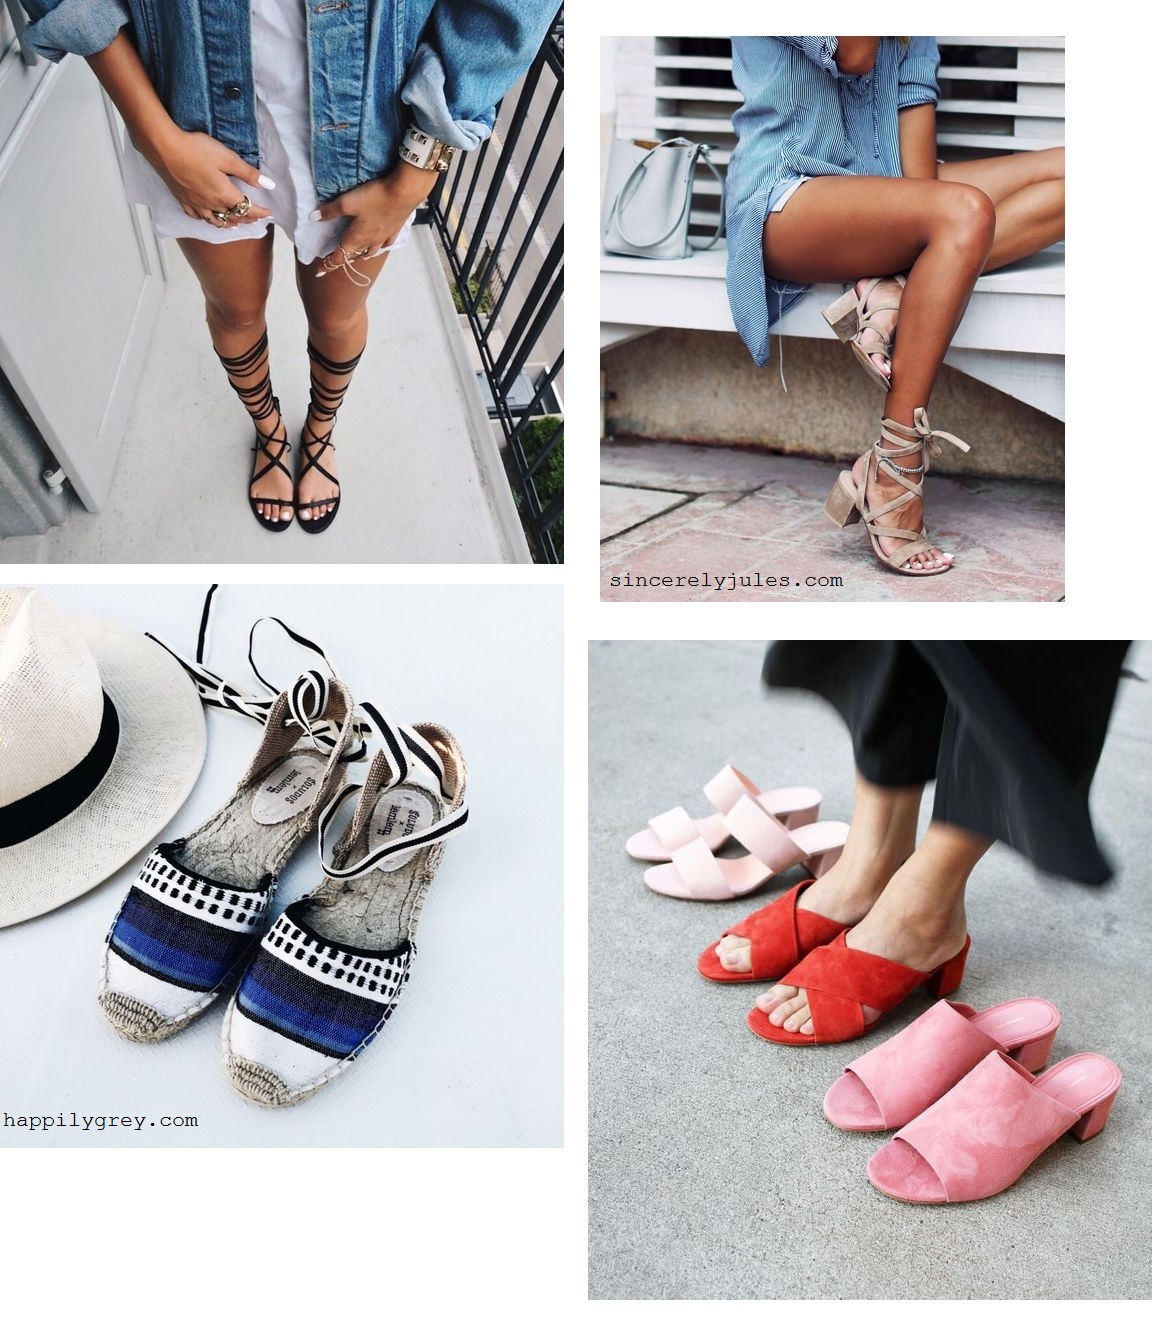 4. Summer vacation shoes 2016 - Pink 